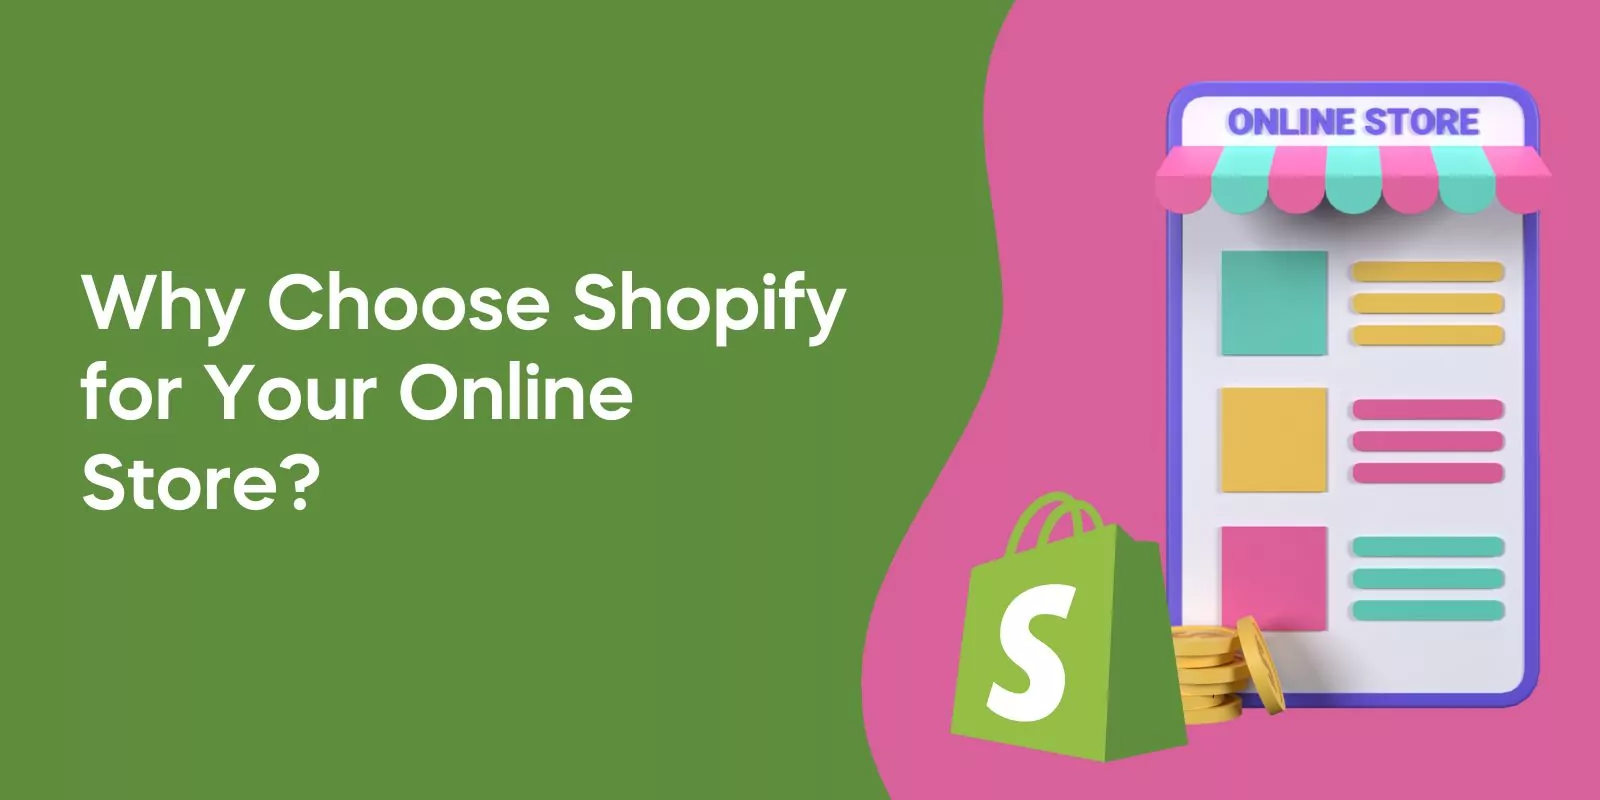 Why Choose Shopify for Your Online Store